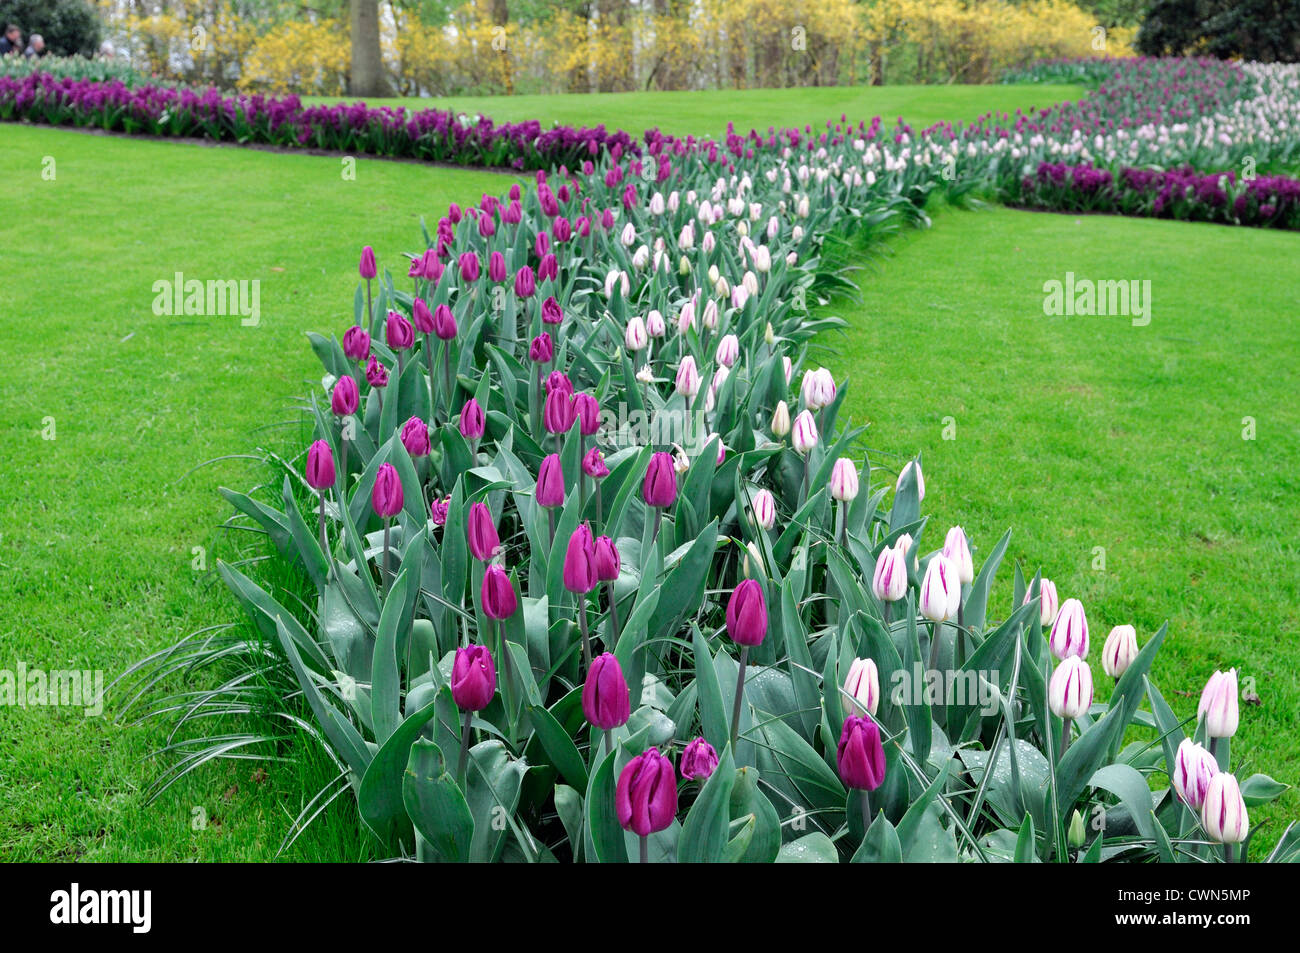 Tulipa flaming flag purple flag triumph tulip flowers display spring flower bloom blossom bed colour color bulb combo mix mixed Stock Photo